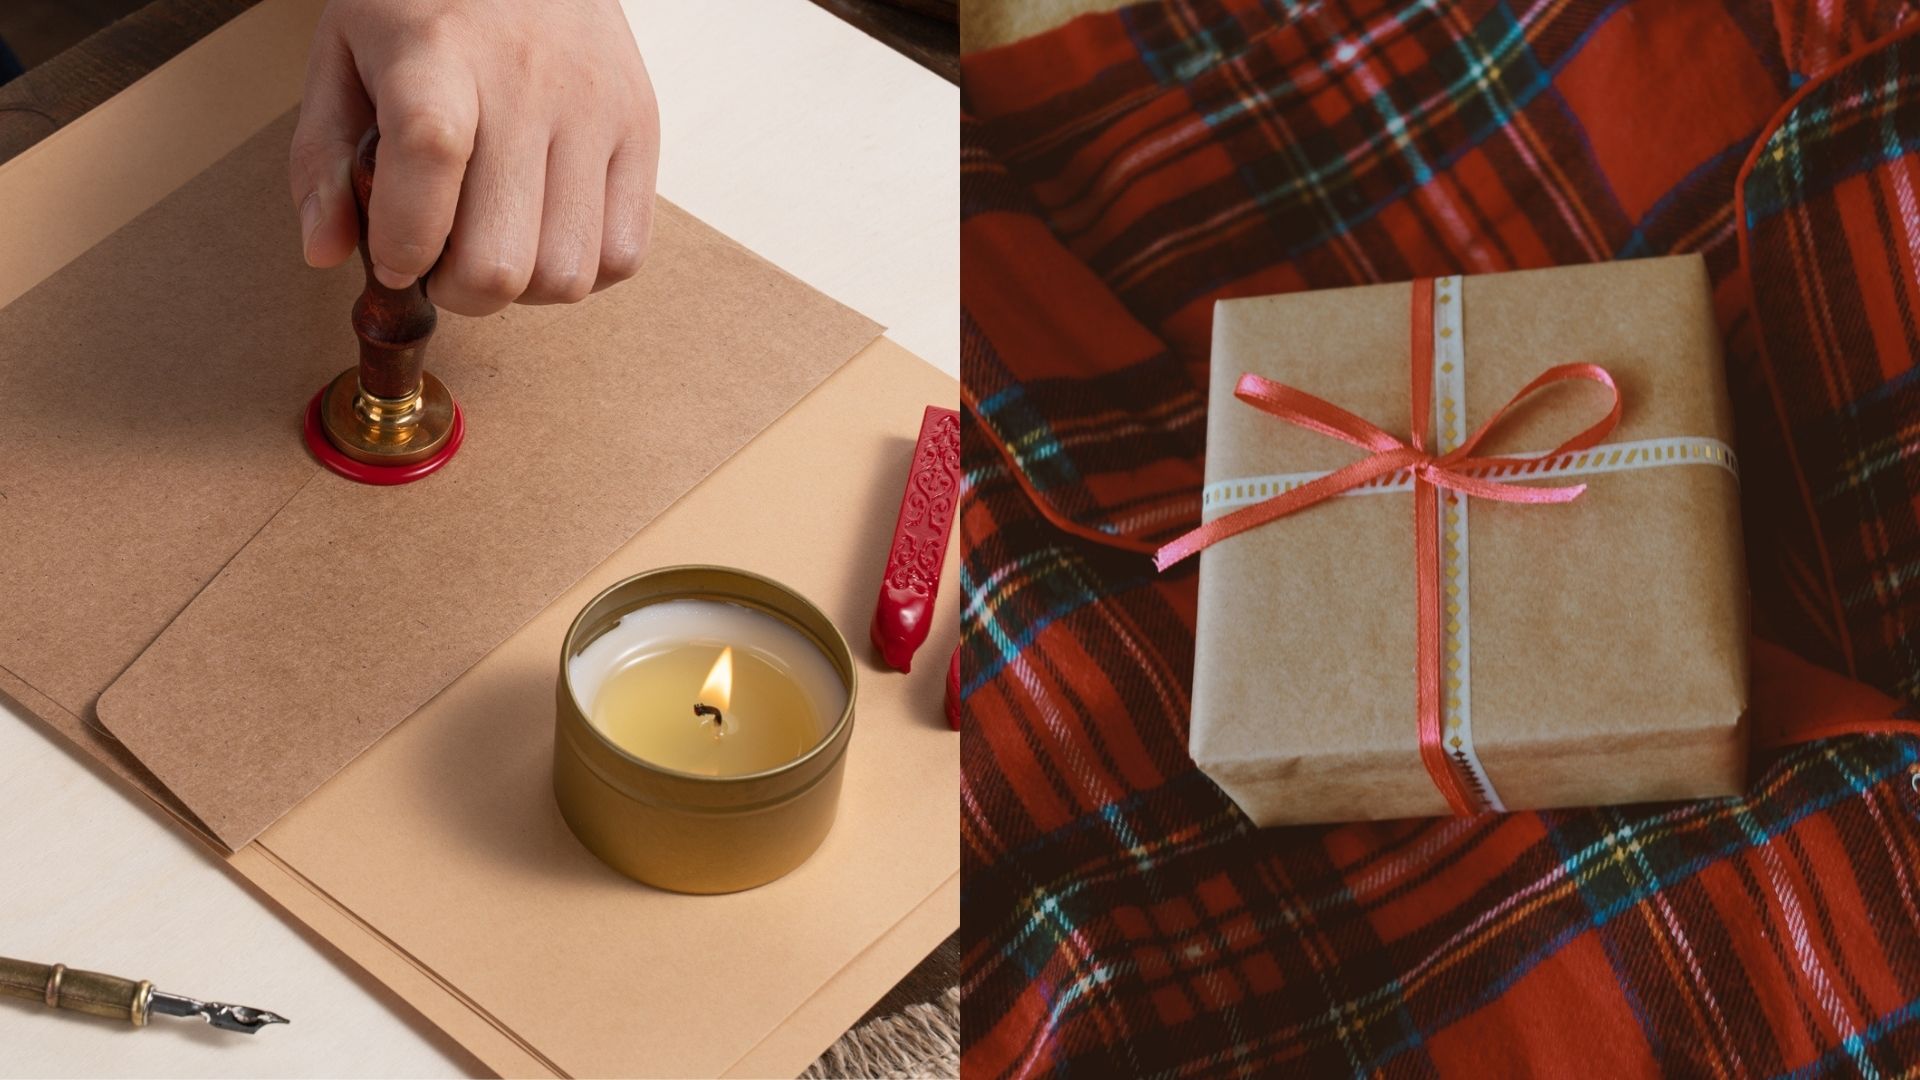 On the left, a hand uses a stamp to place a red wax seal on a brown envelope. On the right is a brown parcel with a red ribbon, placed on tartan fabric.